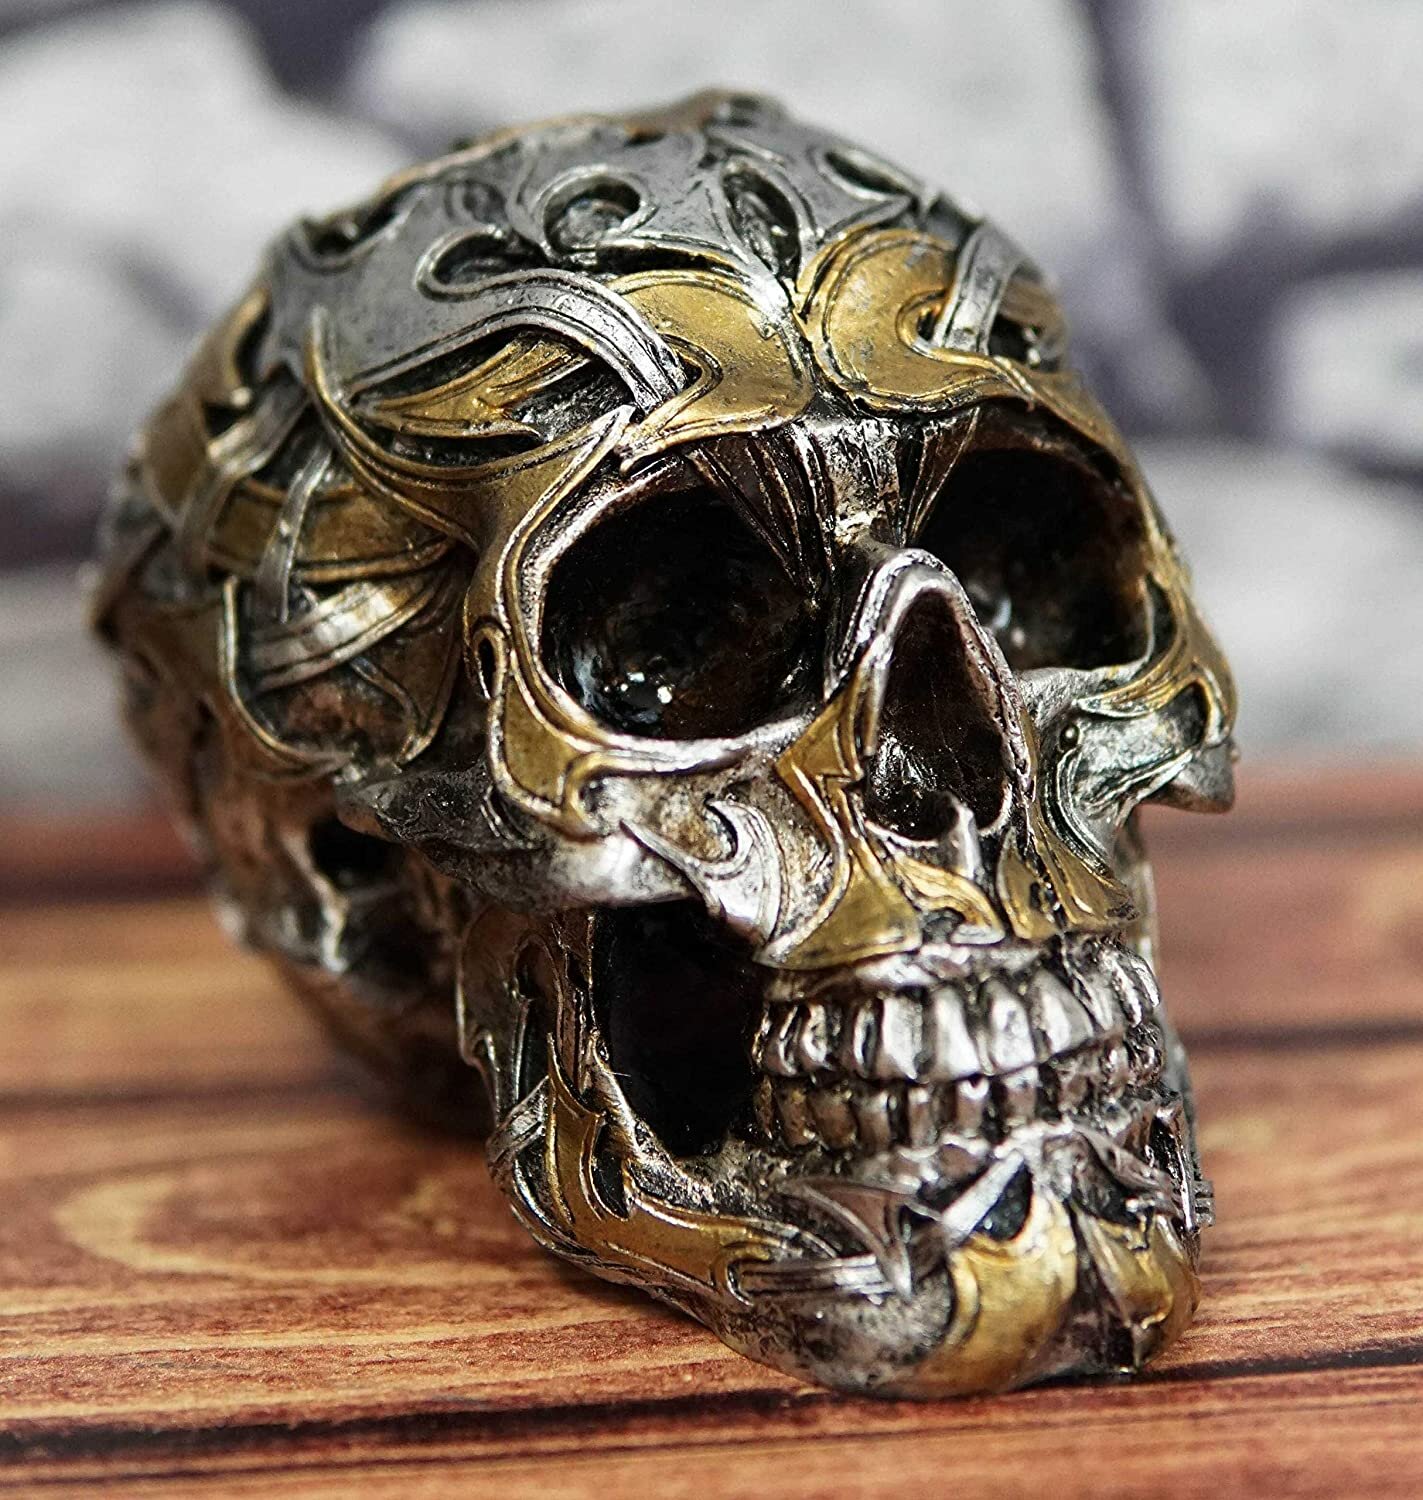 Ebros Goth Cryptic Maori Ultron Silver and Gold Tattoo Lace Skull Statue 5.5 Long As Halloween Macabre Ossuary Decor Skeleton Cranium Day of The Dead Gothic Accessory Accent Figurine